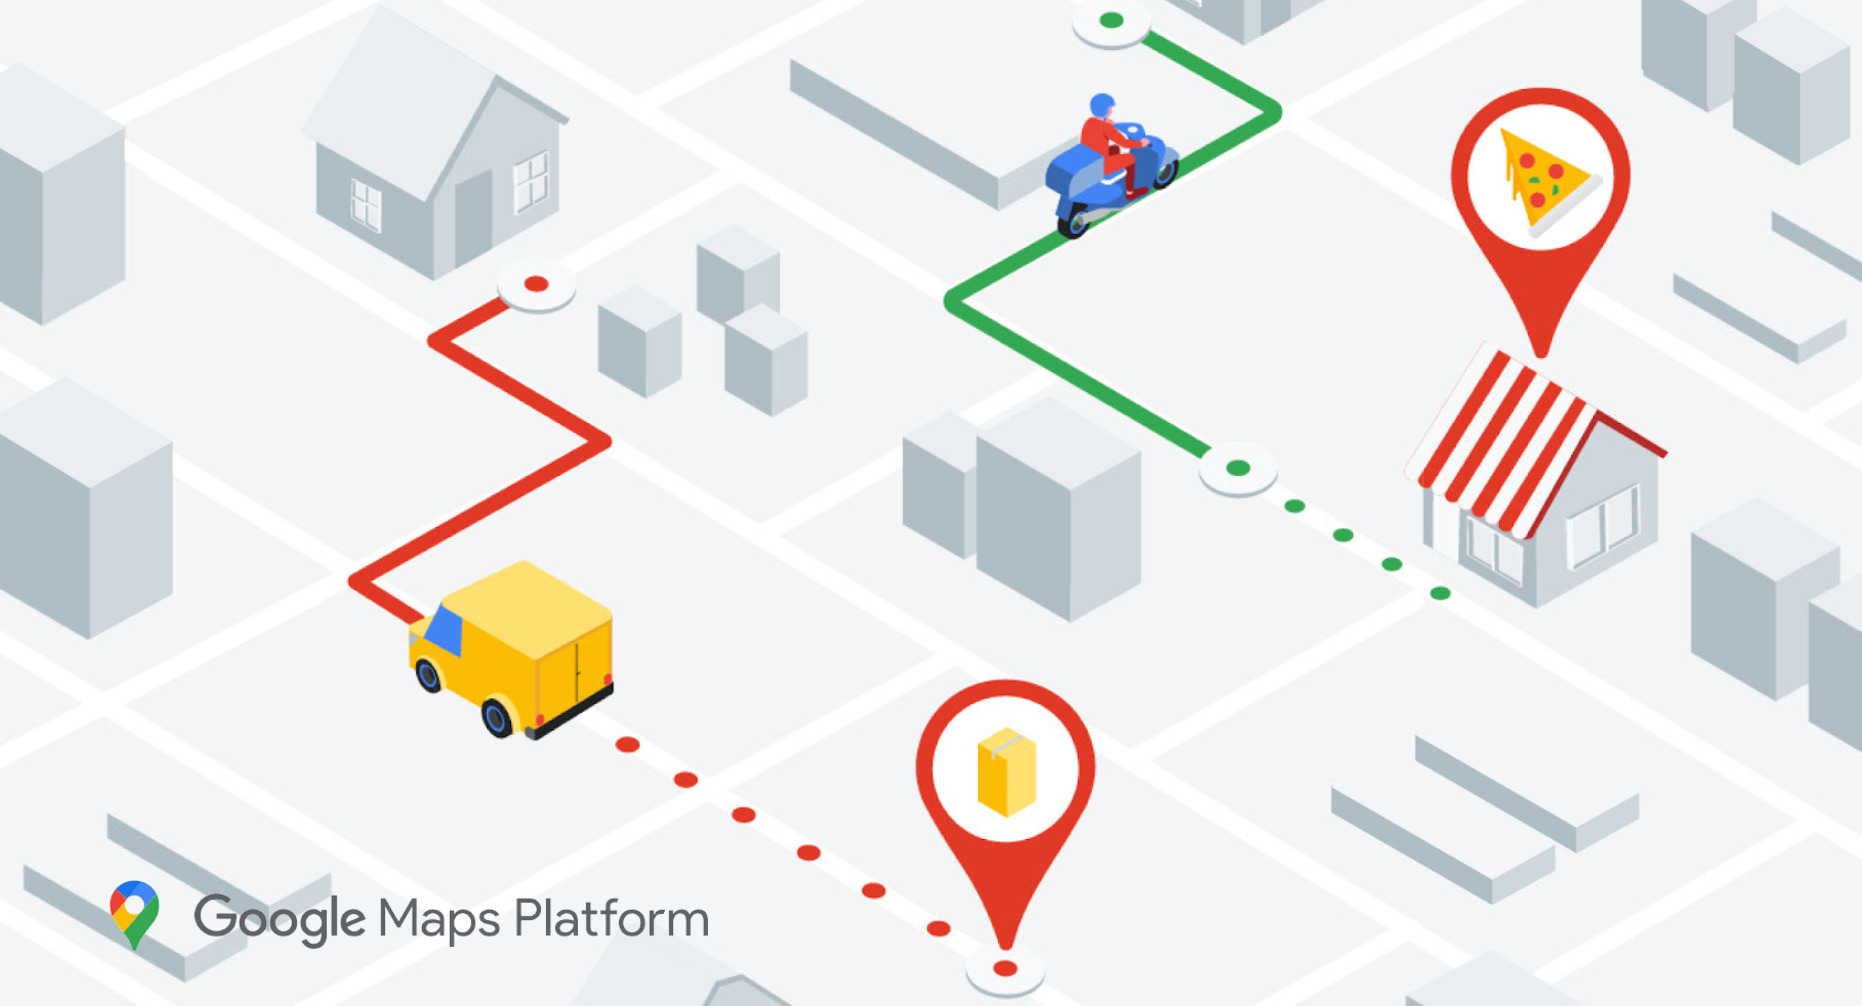 What type of platform is Google map?